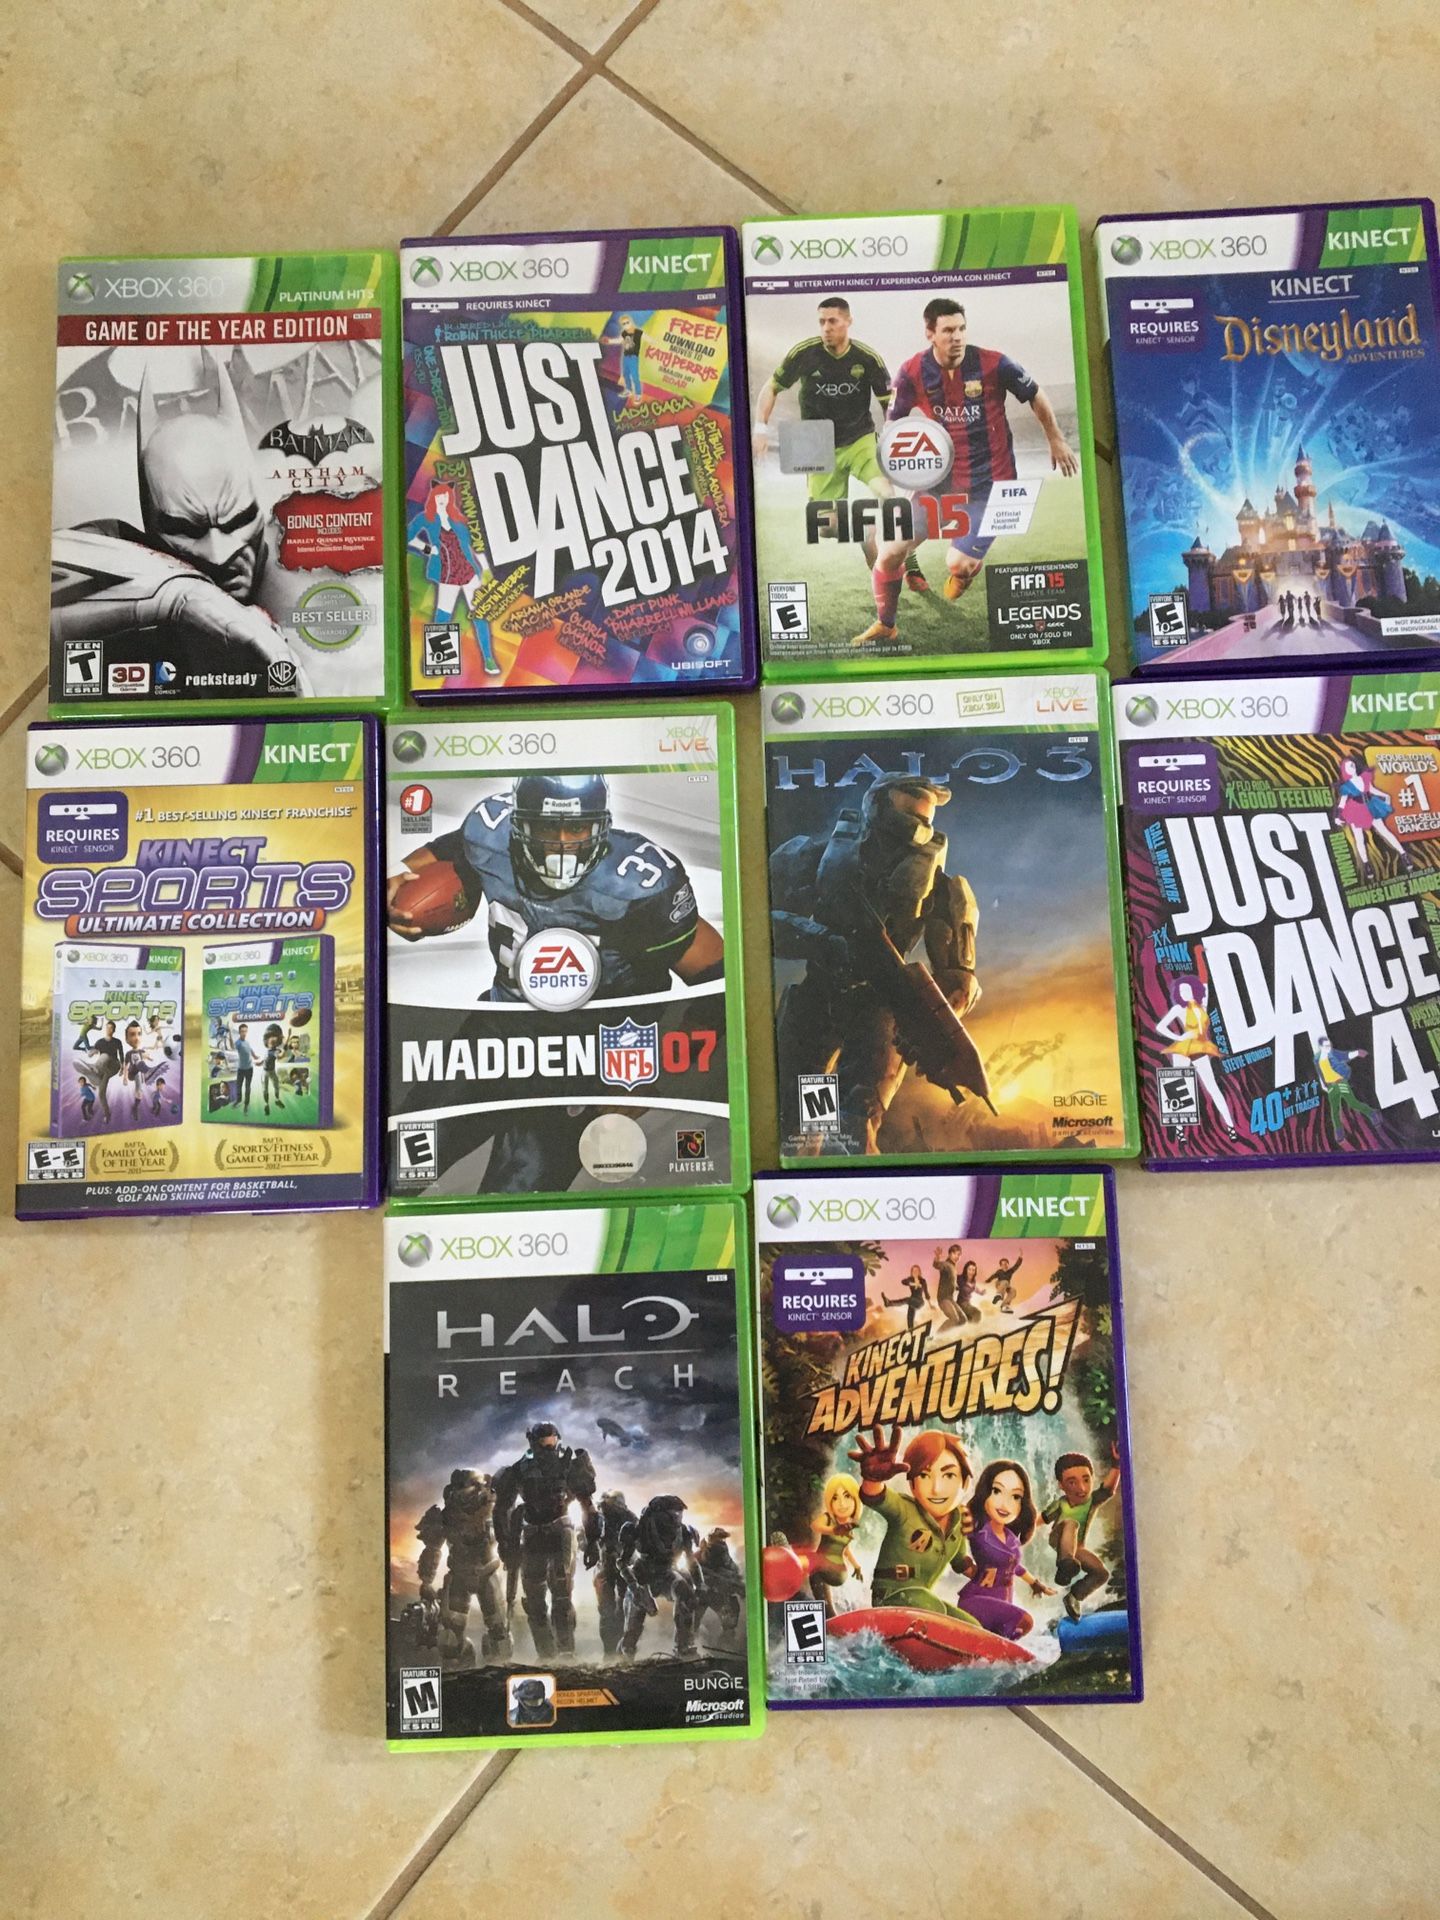 Xbox 360, Wii, & PlayStation 3 games